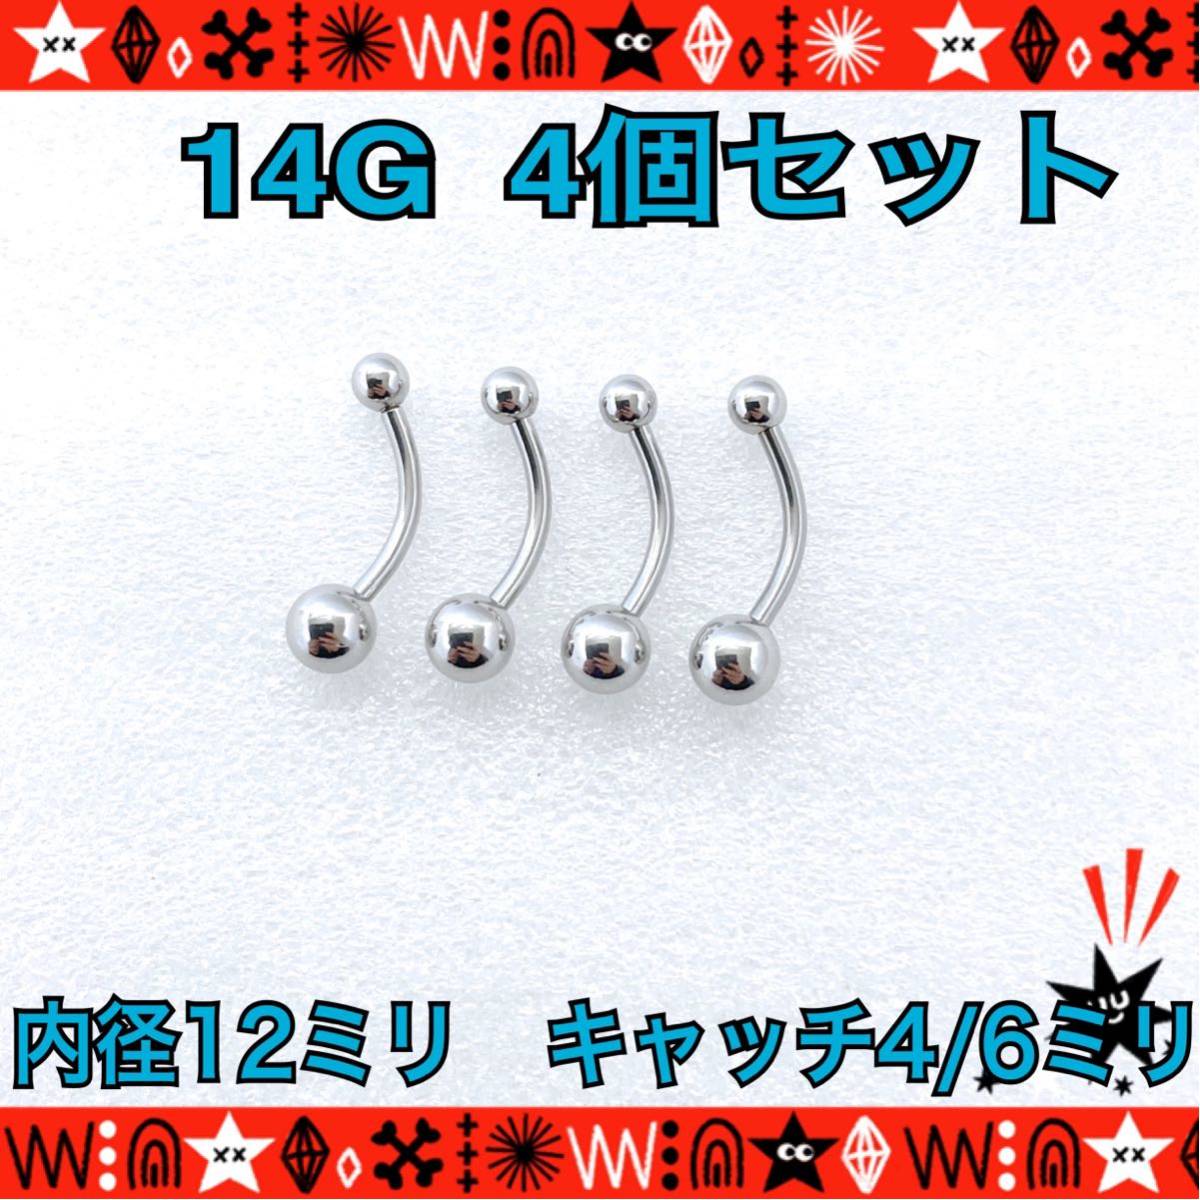  body pierce 14G 4 piece set banana barbell .. navel pierce 12mm×4/6mm surgical stainless steel ear .. standard simple [ anonymity delivery ]